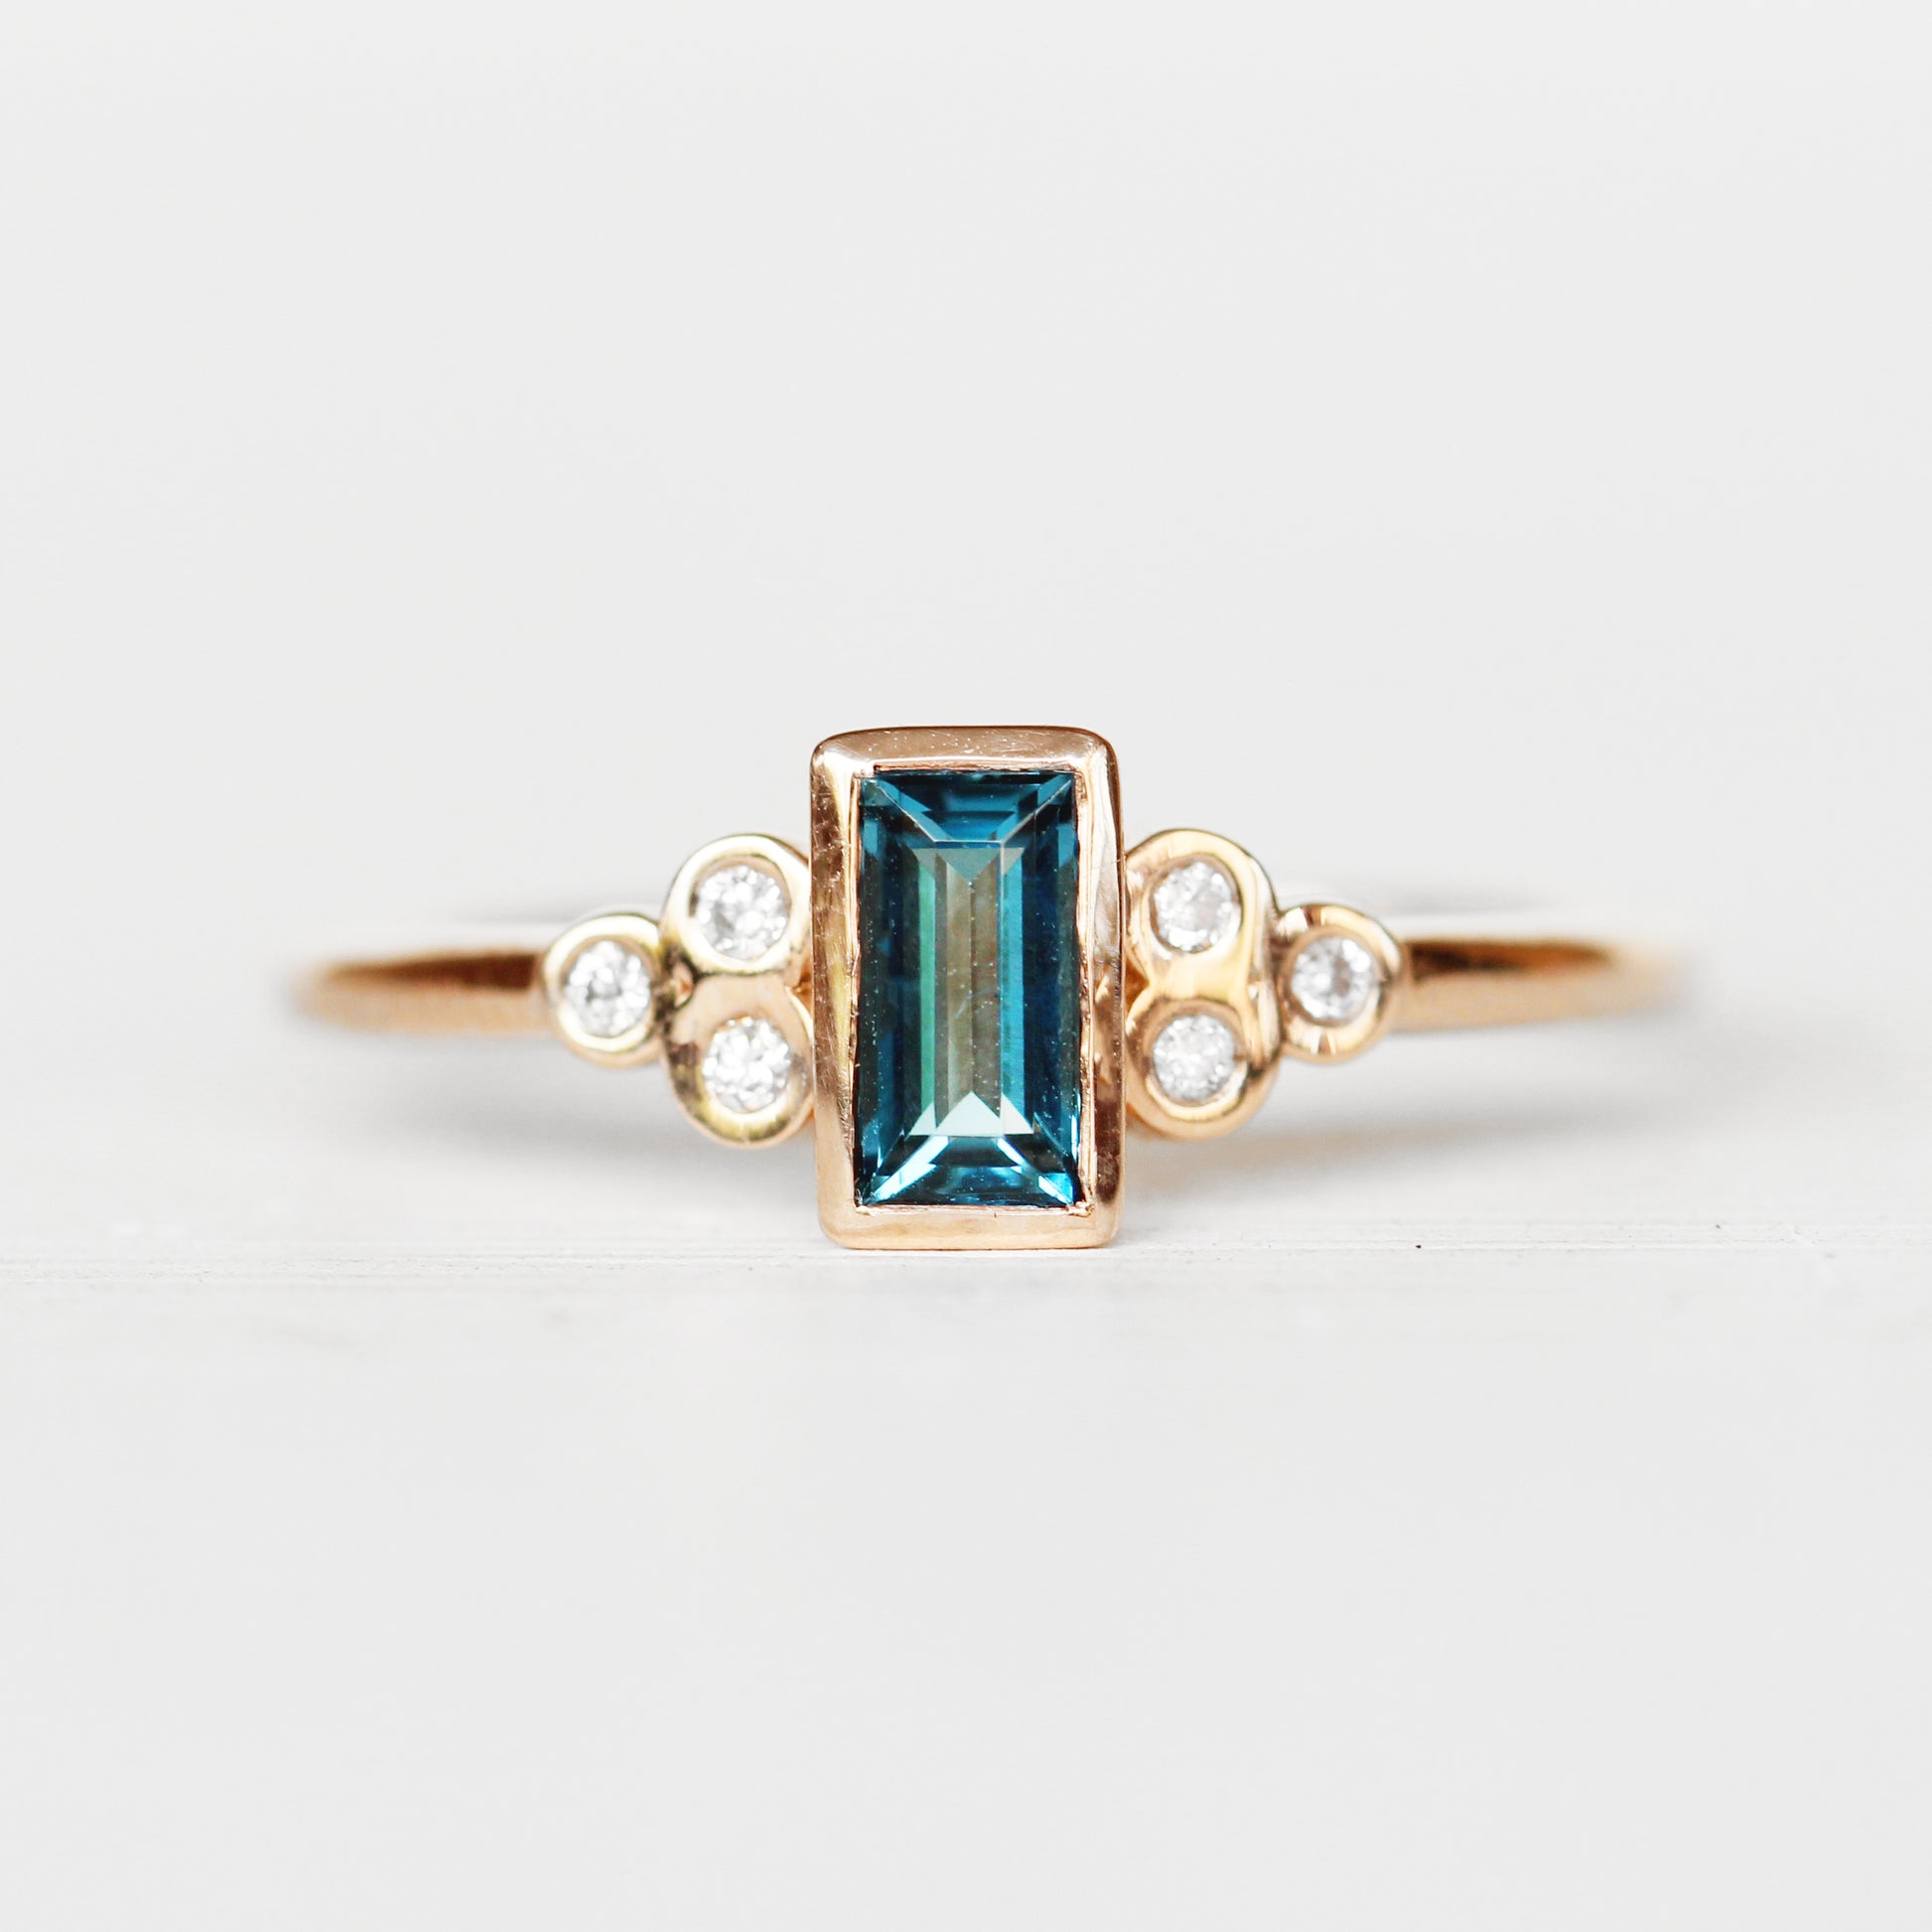 Sophia - London Blue Topaz in Rose Gold Ring - Made to order - Midwinter Co. Alternative Bridal Rings and Modern Fine Jewelry